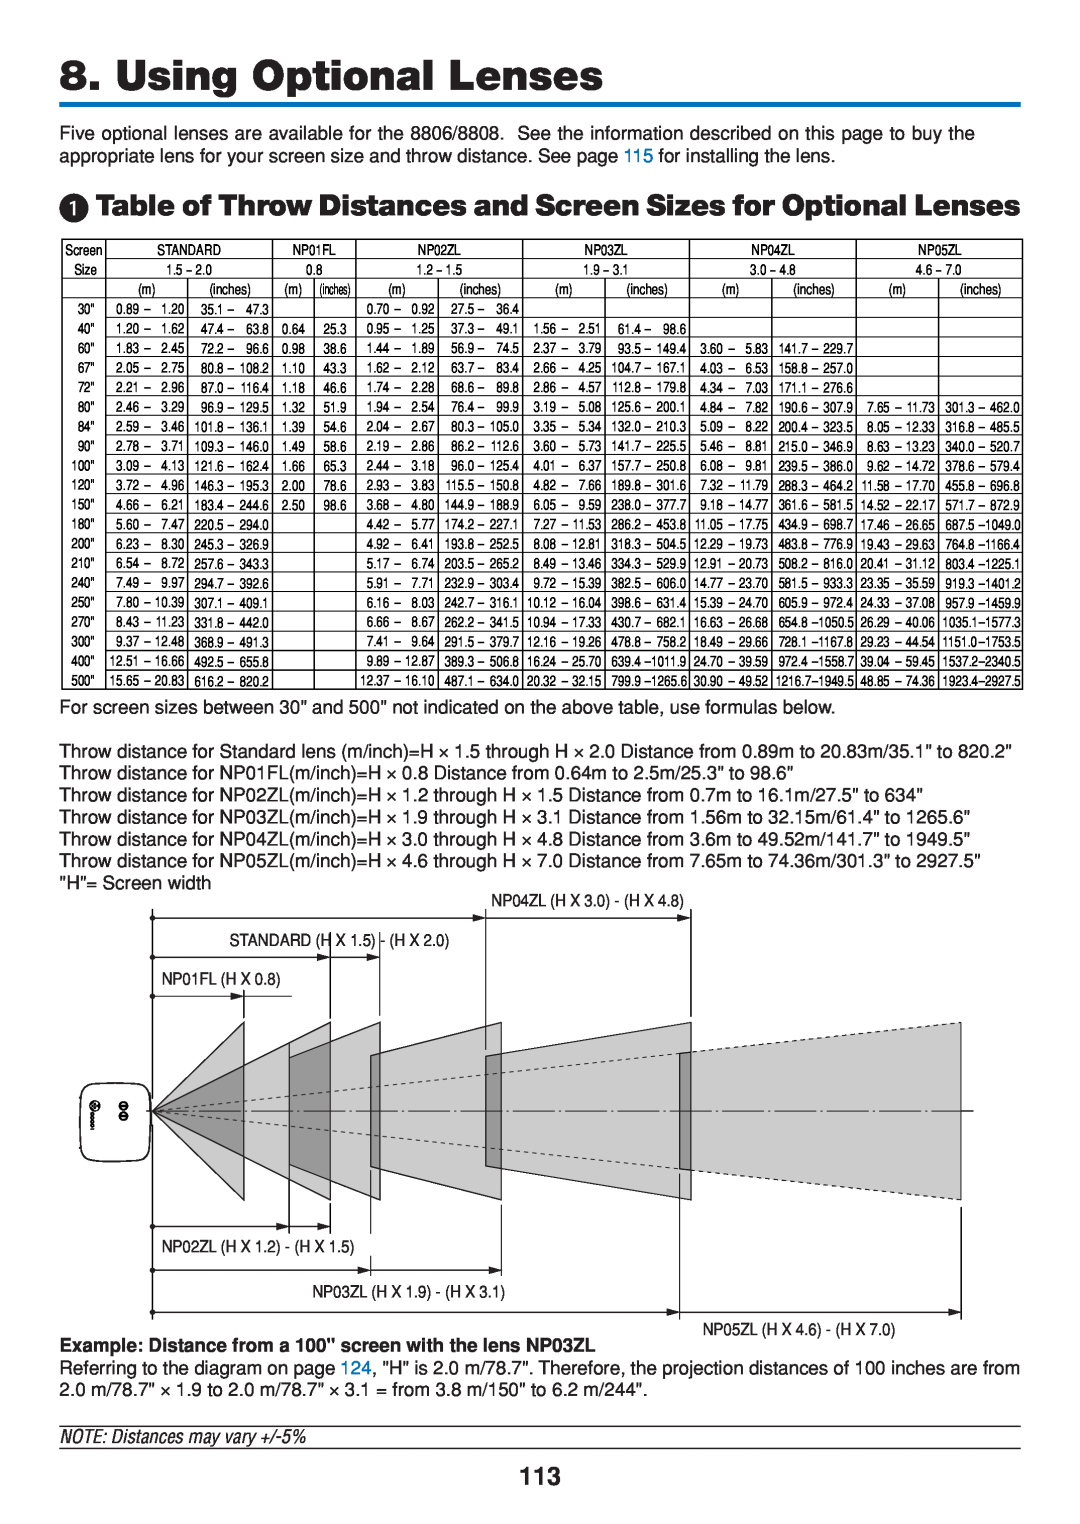 Dukane 8808 user manual Using Optional Lenses, Table of Throw Distances and Screen Sizes for Optional Lenses 